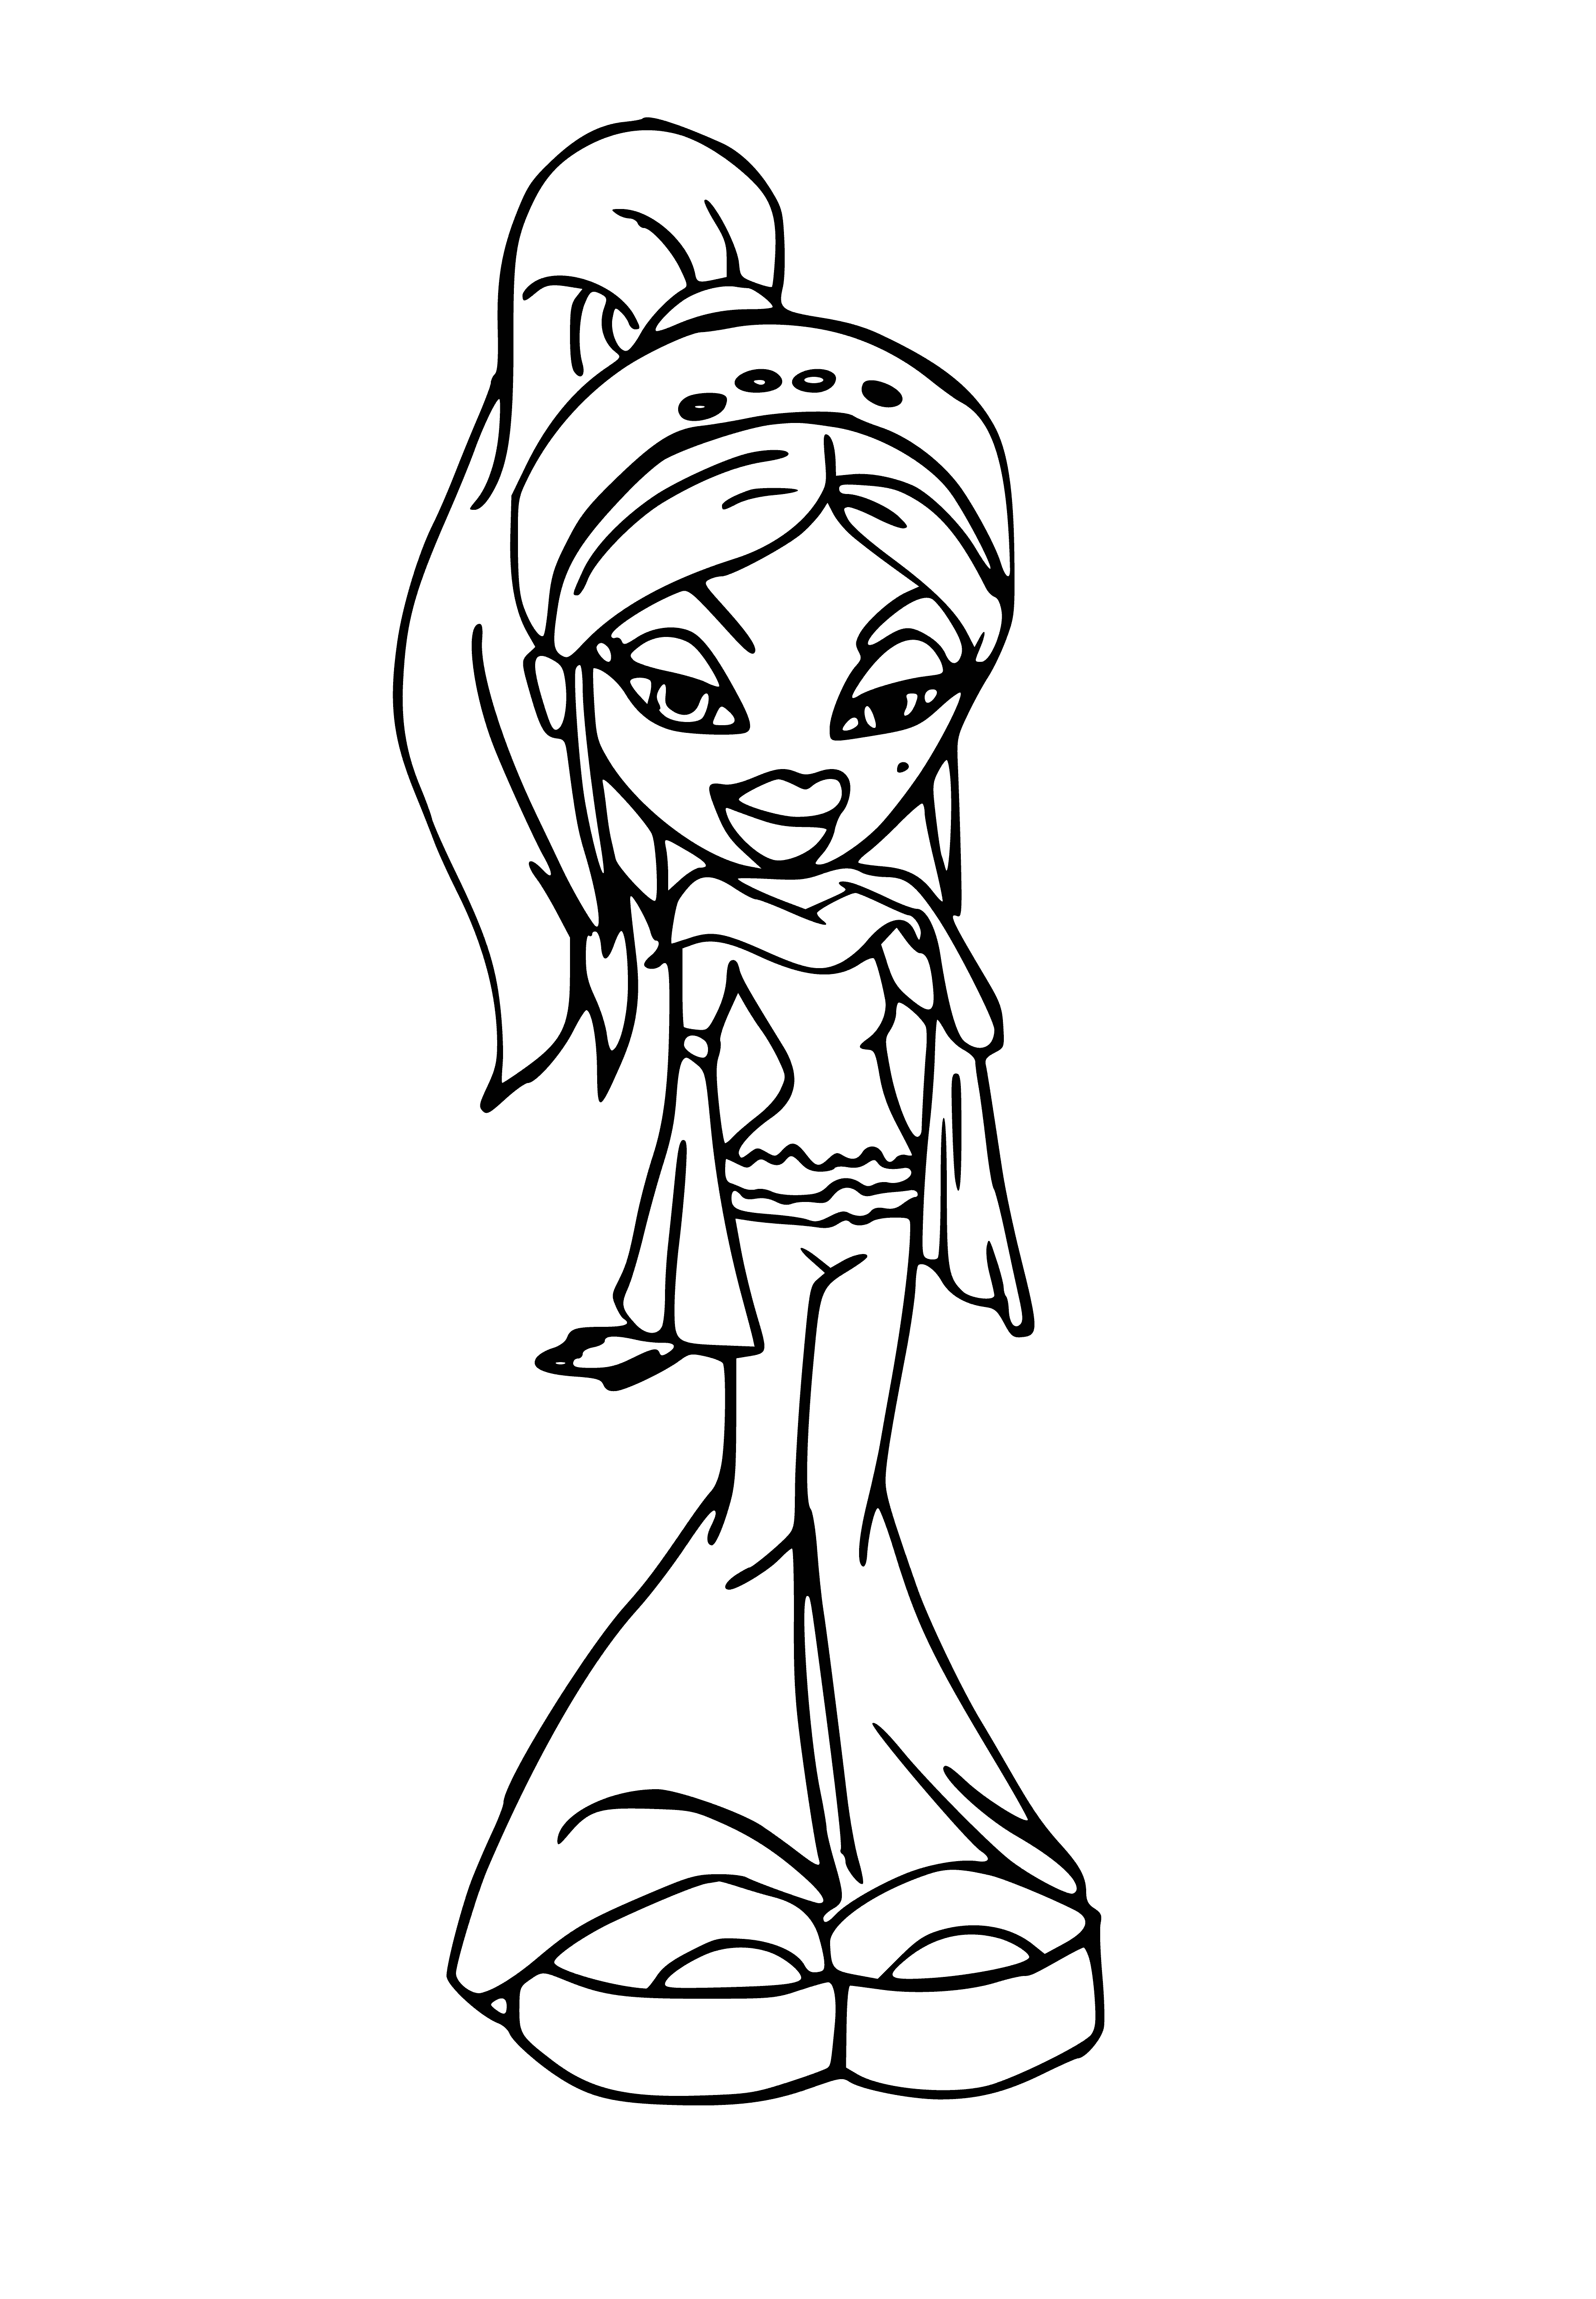 Bratz doll coloring page